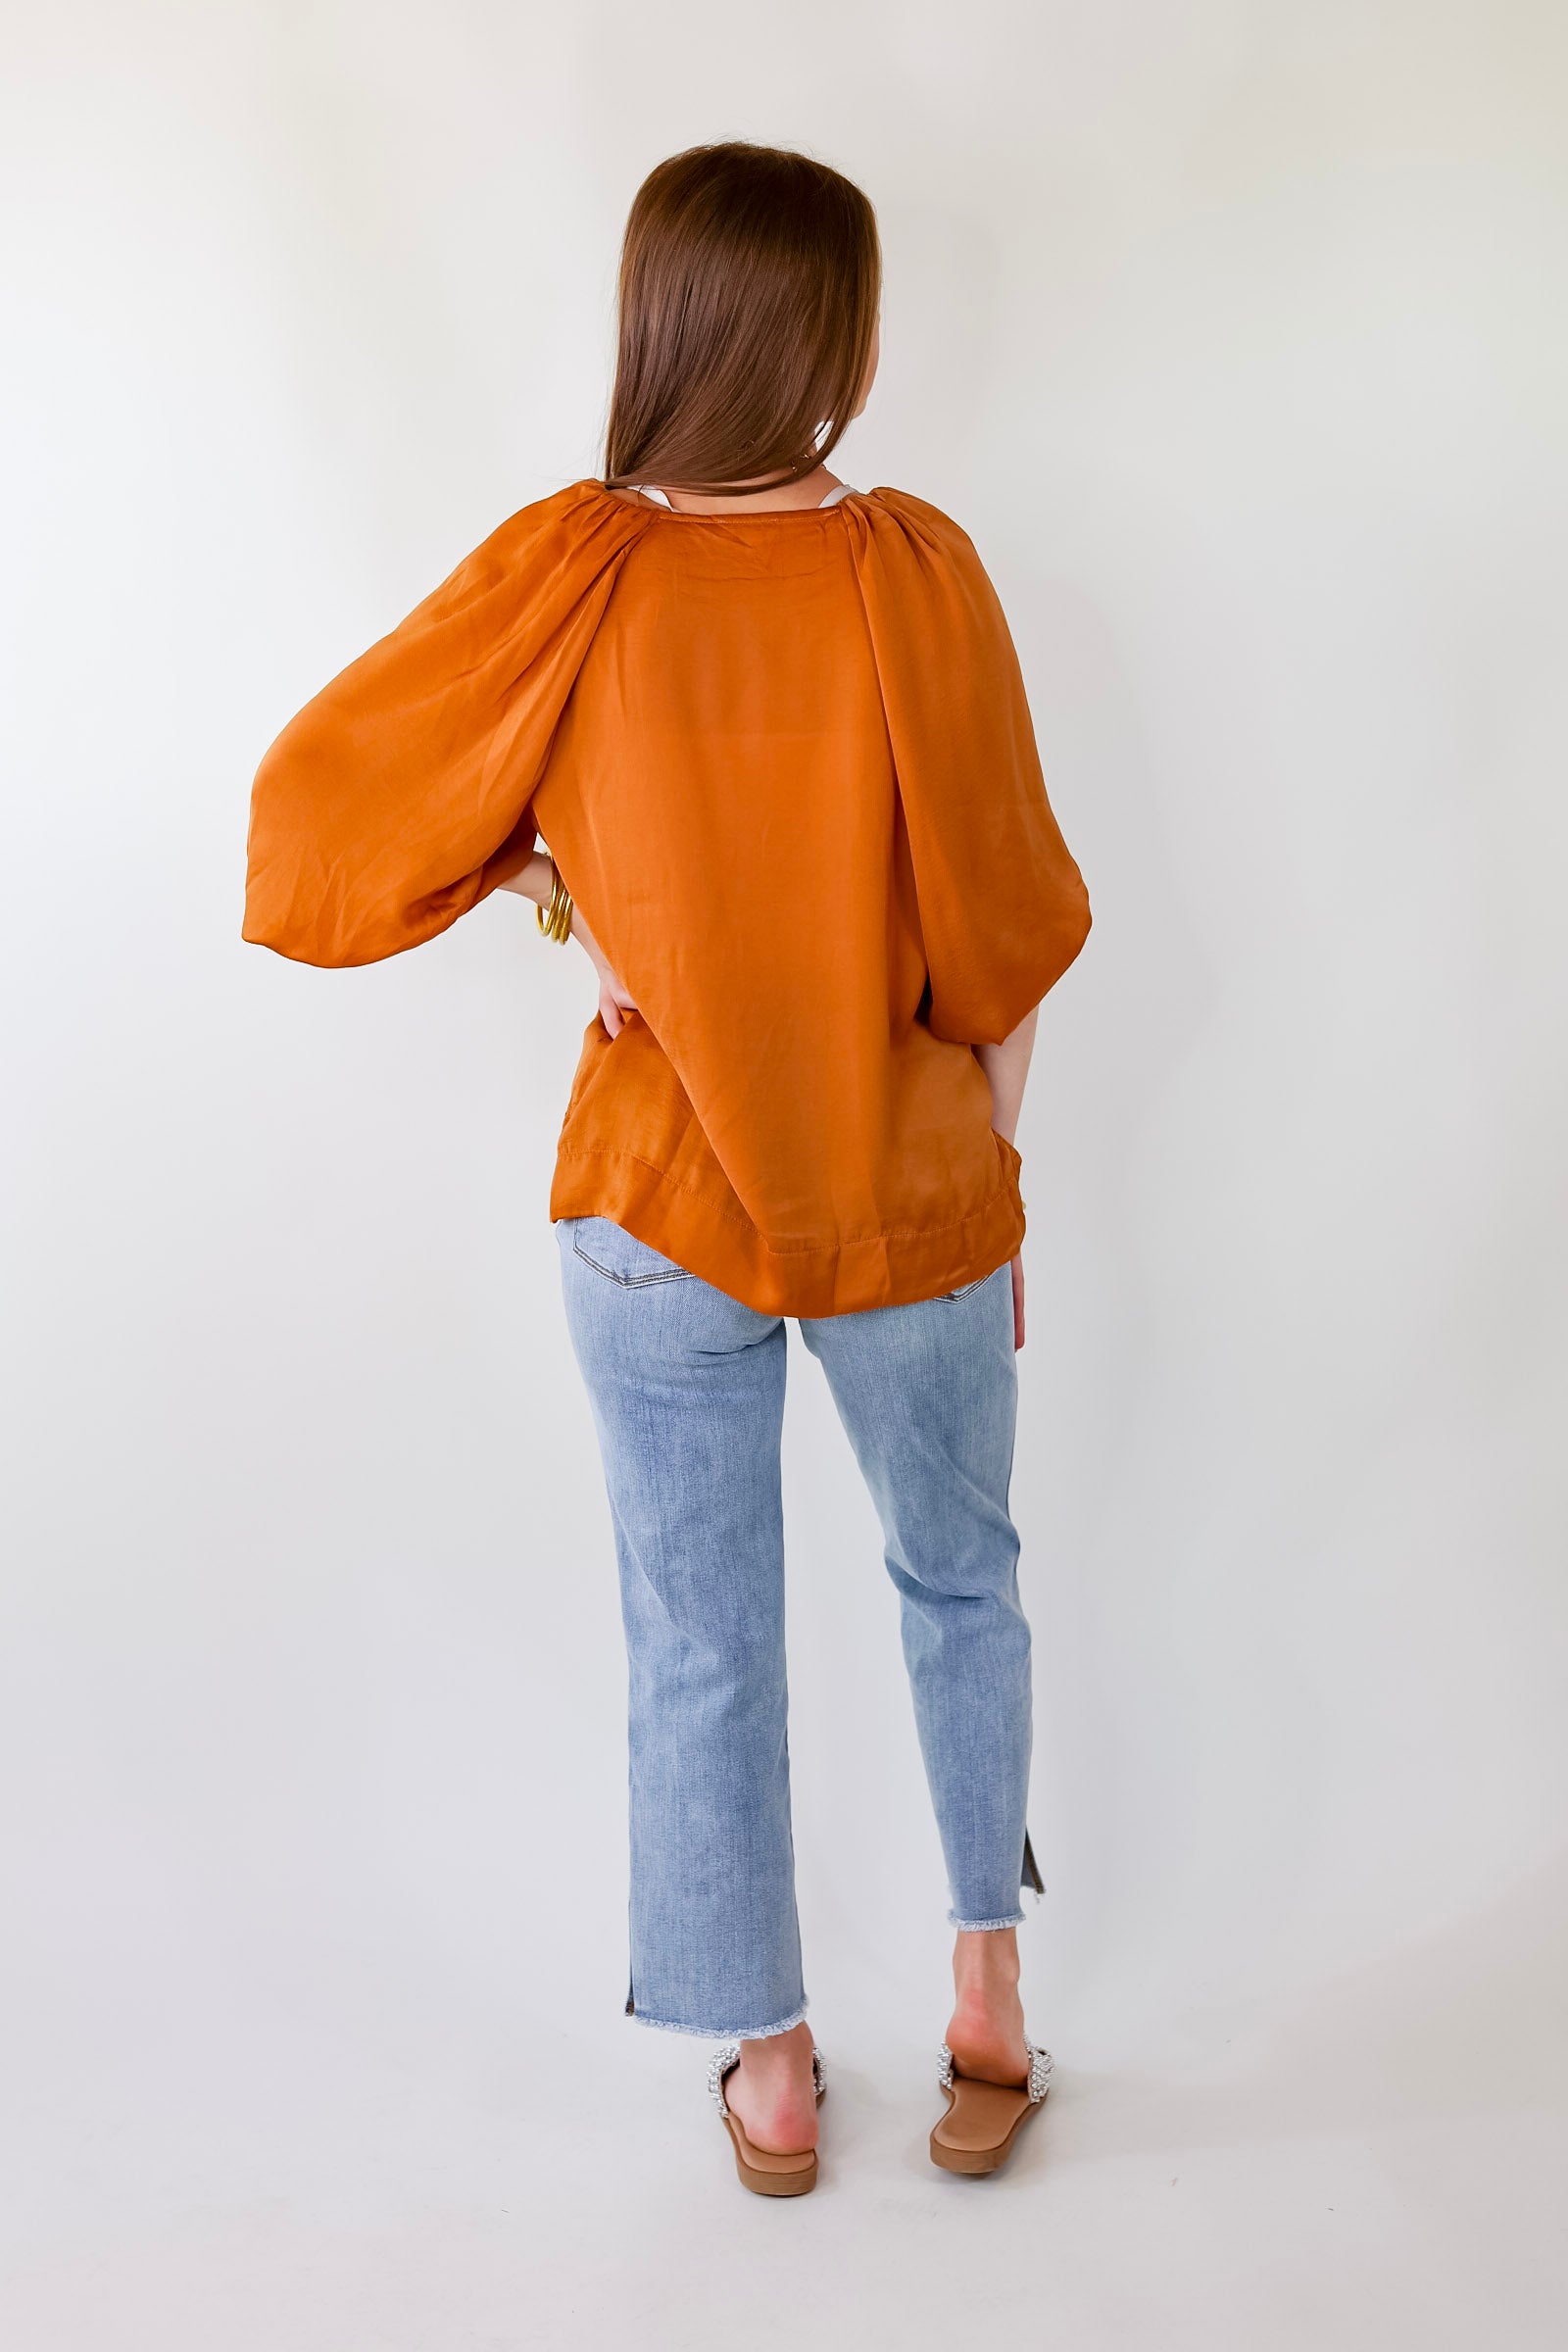 Flash A Smile Half Balloon Sleeve Satin Blouse in Burnt Orange - Giddy Up Glamour Boutique